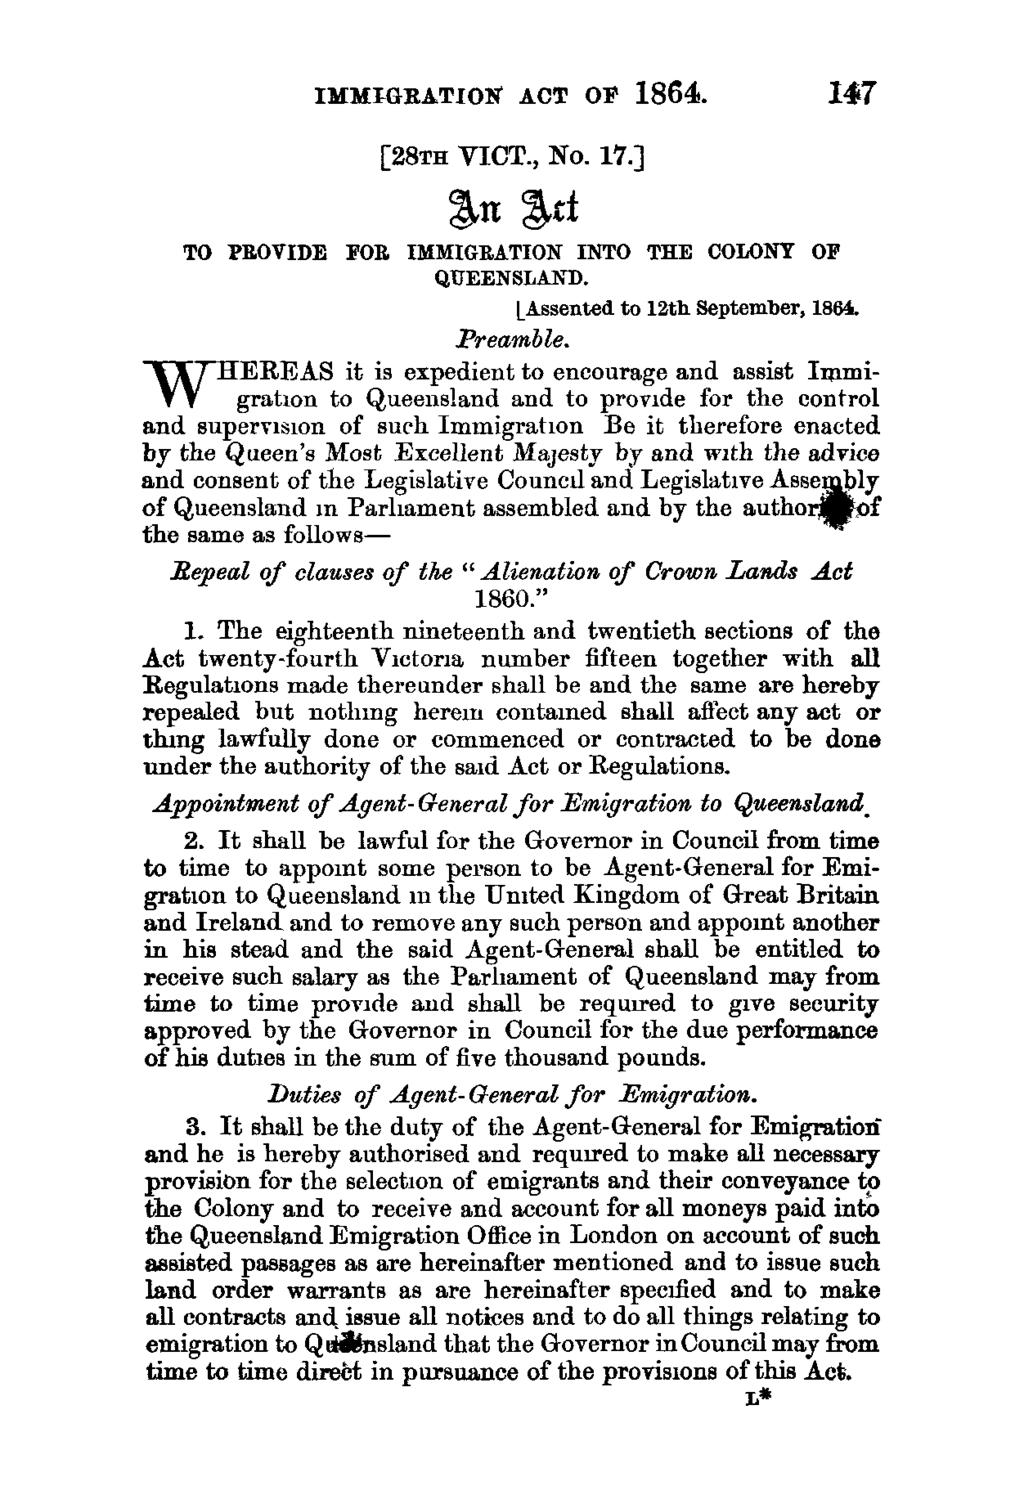 IMMLGEATIONT ACT OF 1864. 147 [28TH VICT., No. 17.] an Ad TO PROVIDE FOR IMMIGRATION INTO THE COLONY OF QUEENSLAND. LAssented to 12th September, 1864, Preamble.